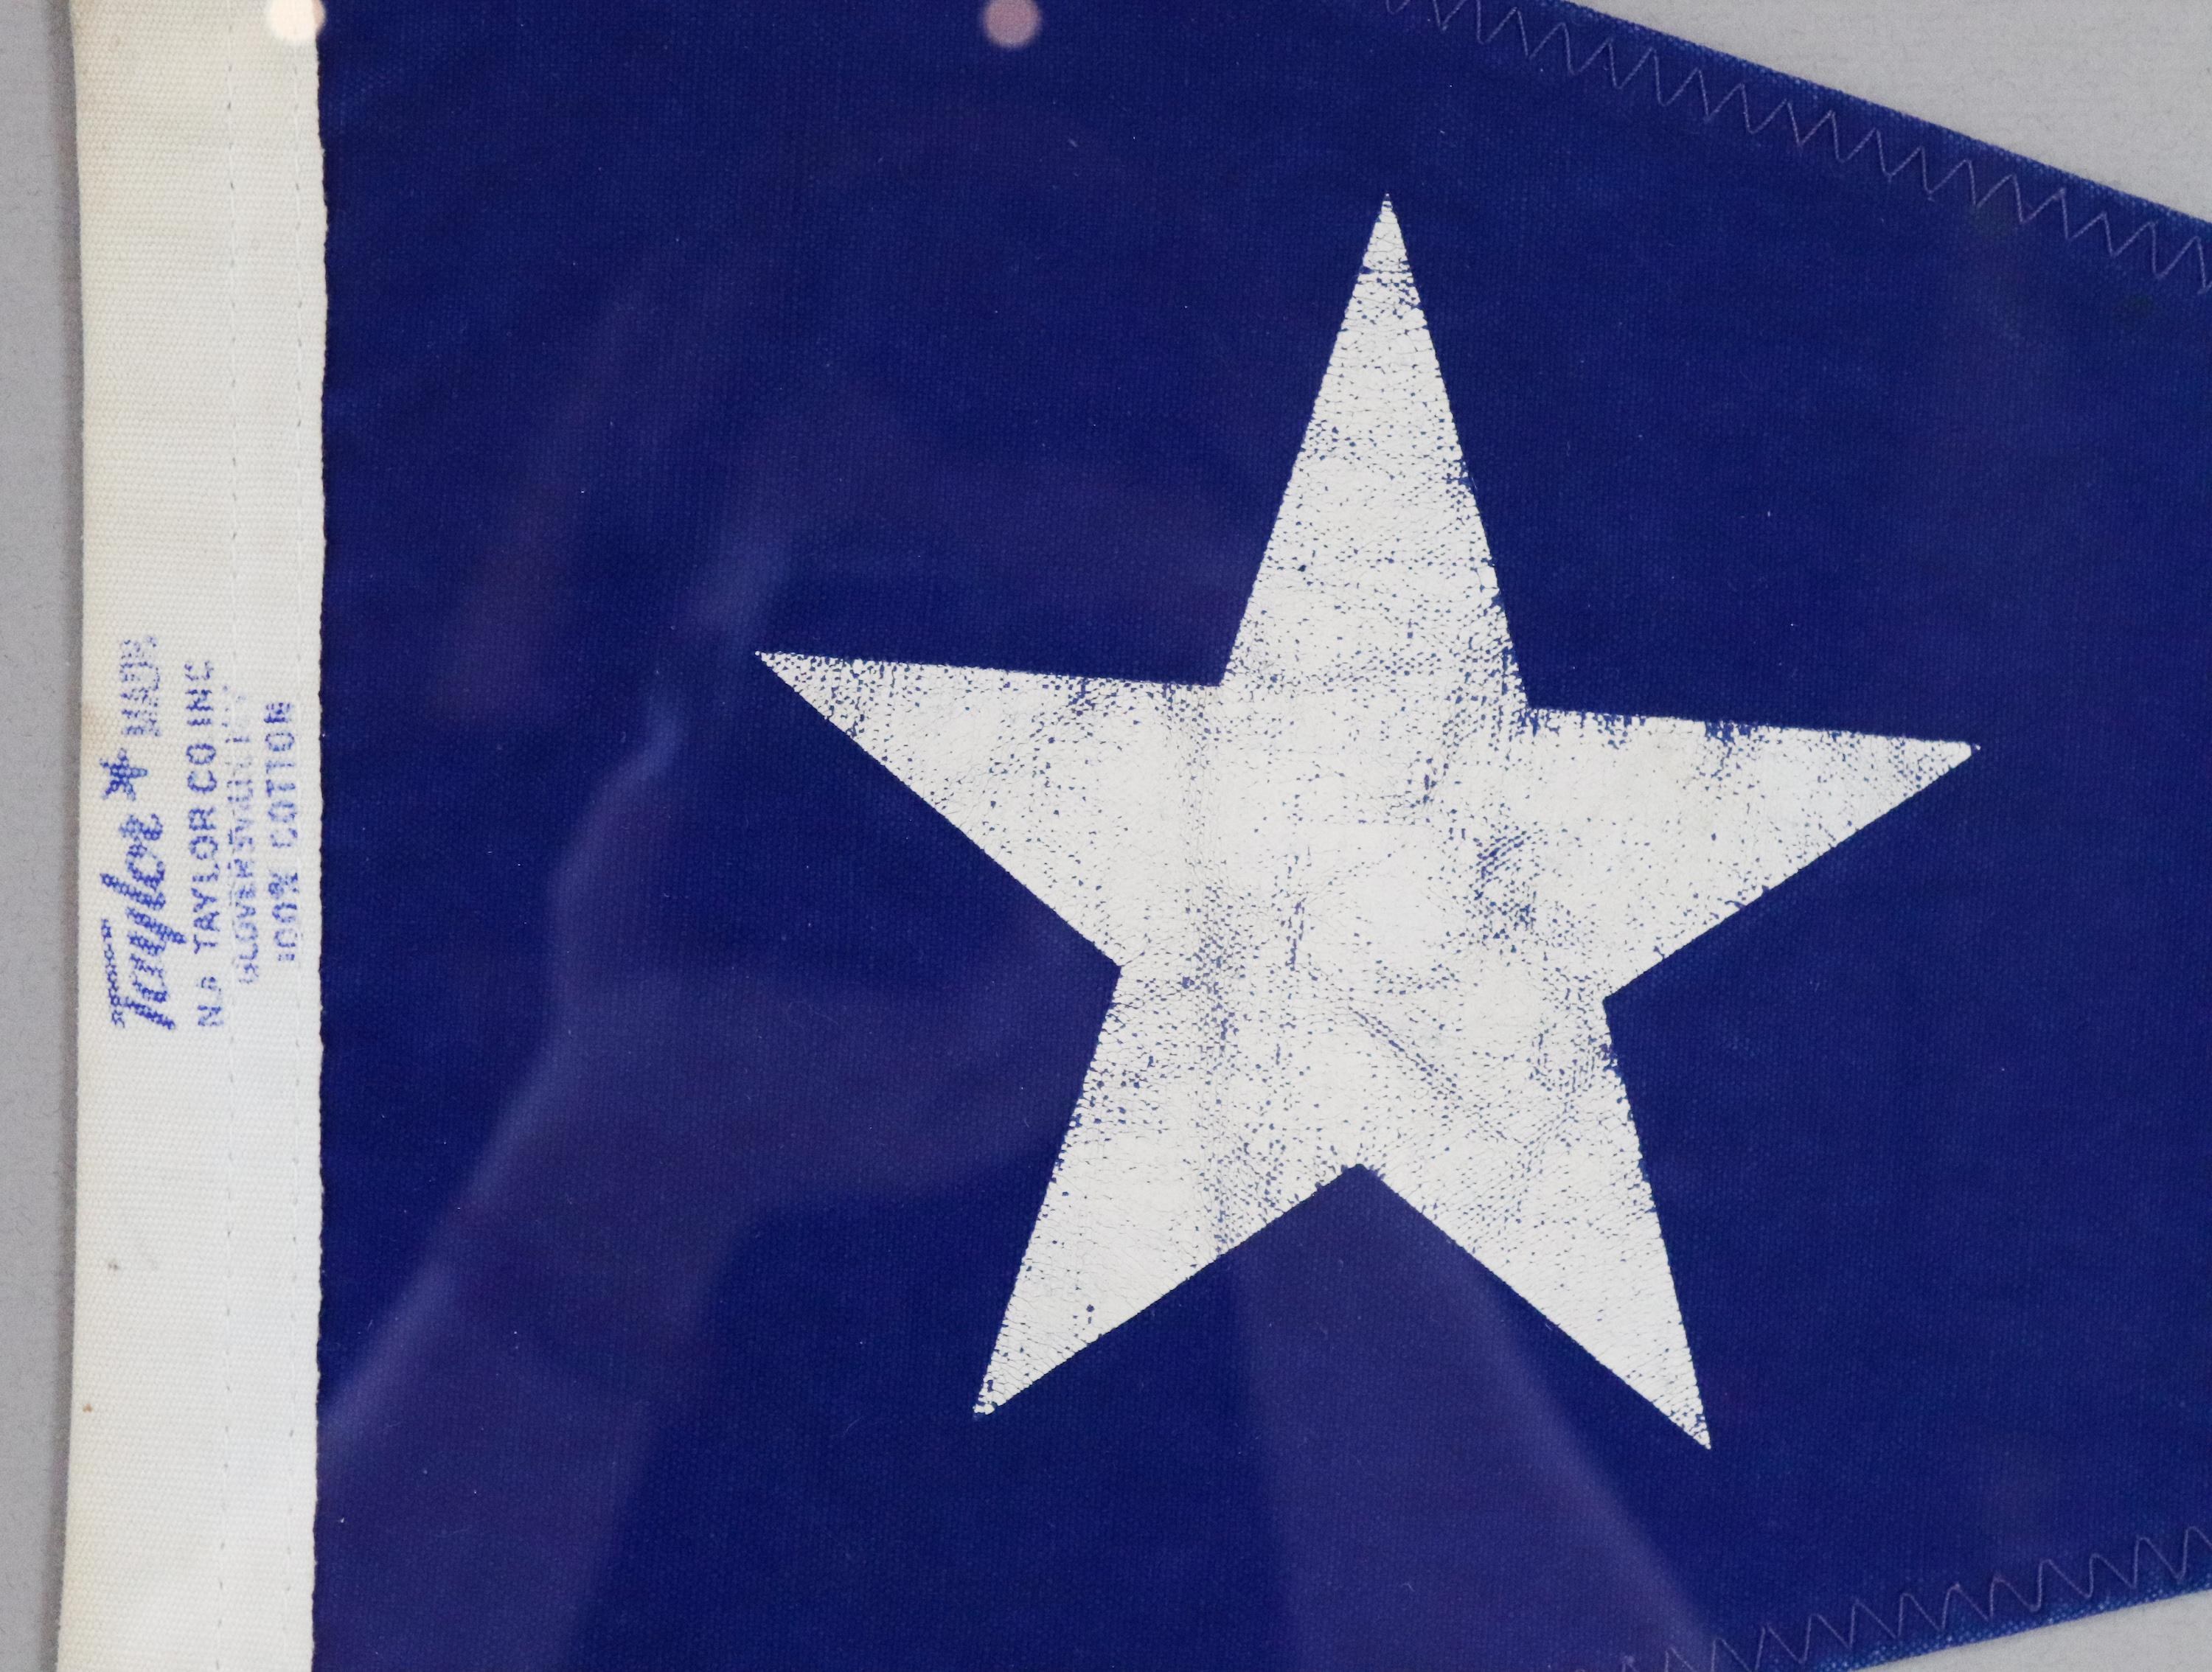 Framed nautical pennant, navy blue burgee flag with white star by Taylor. 100% cotton. Nicely framed. Measures: 22